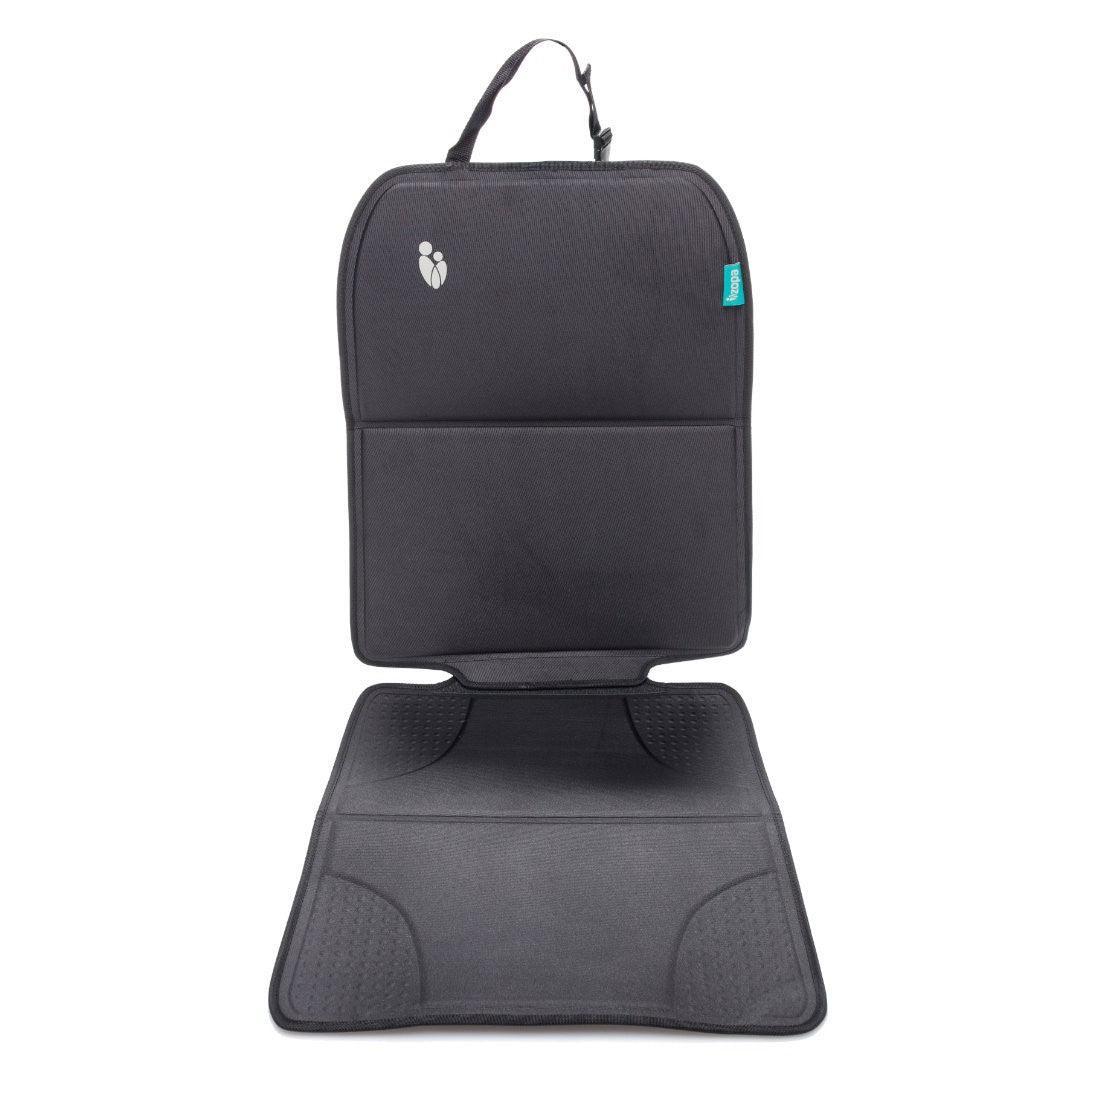 Zopa - Zopa Firm seat cover - Mari Kali Stores Cyprus